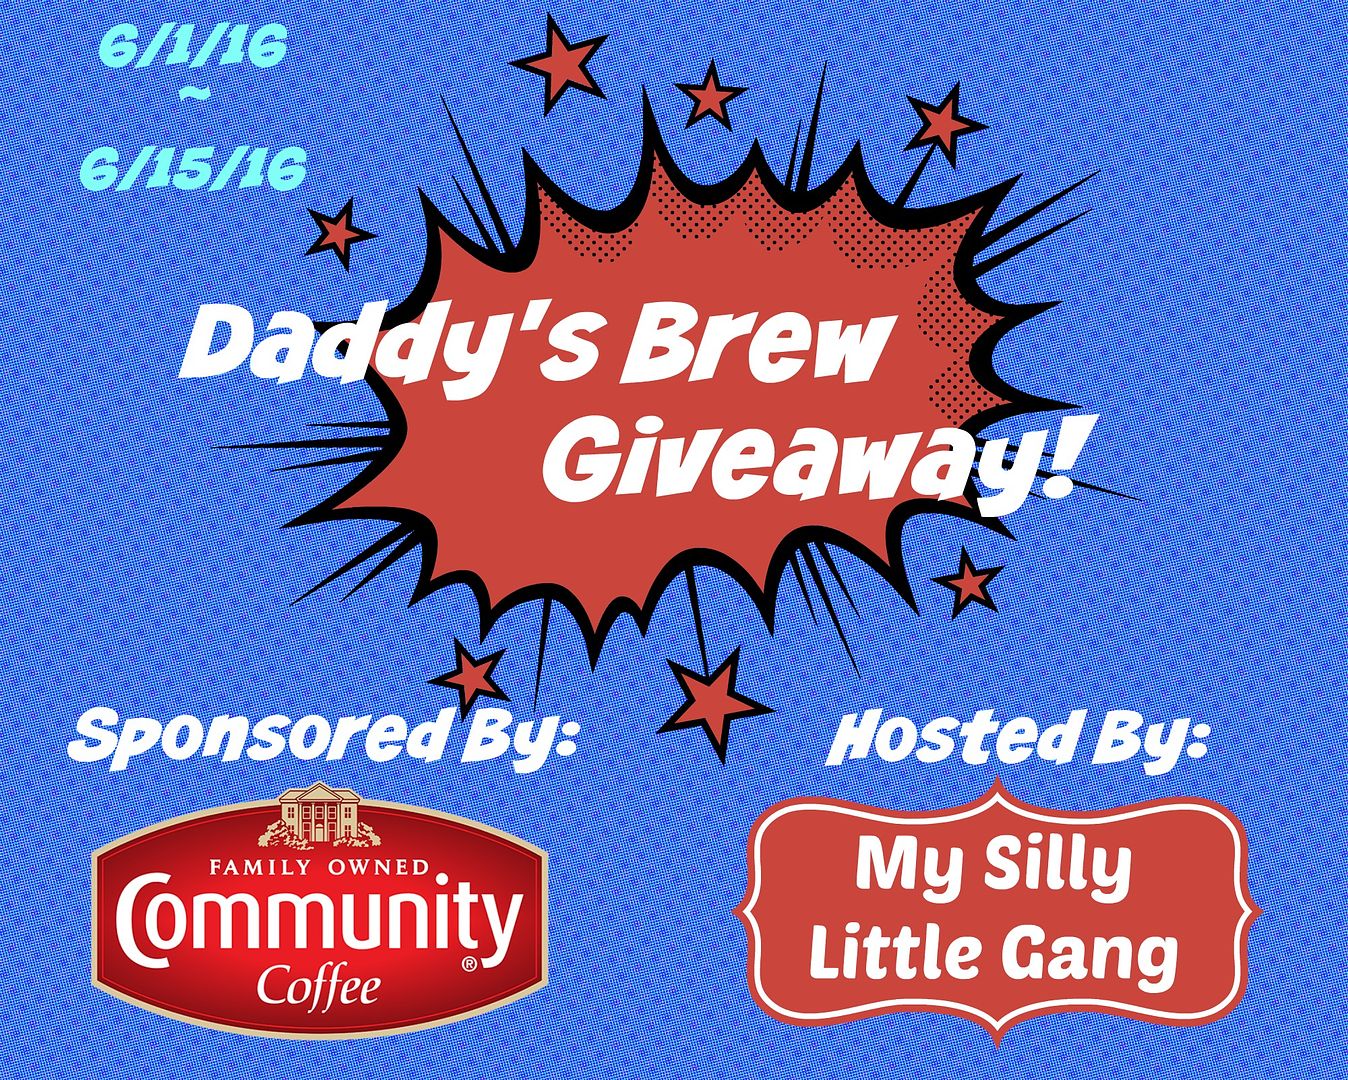 Daddy's Brew Giveaway